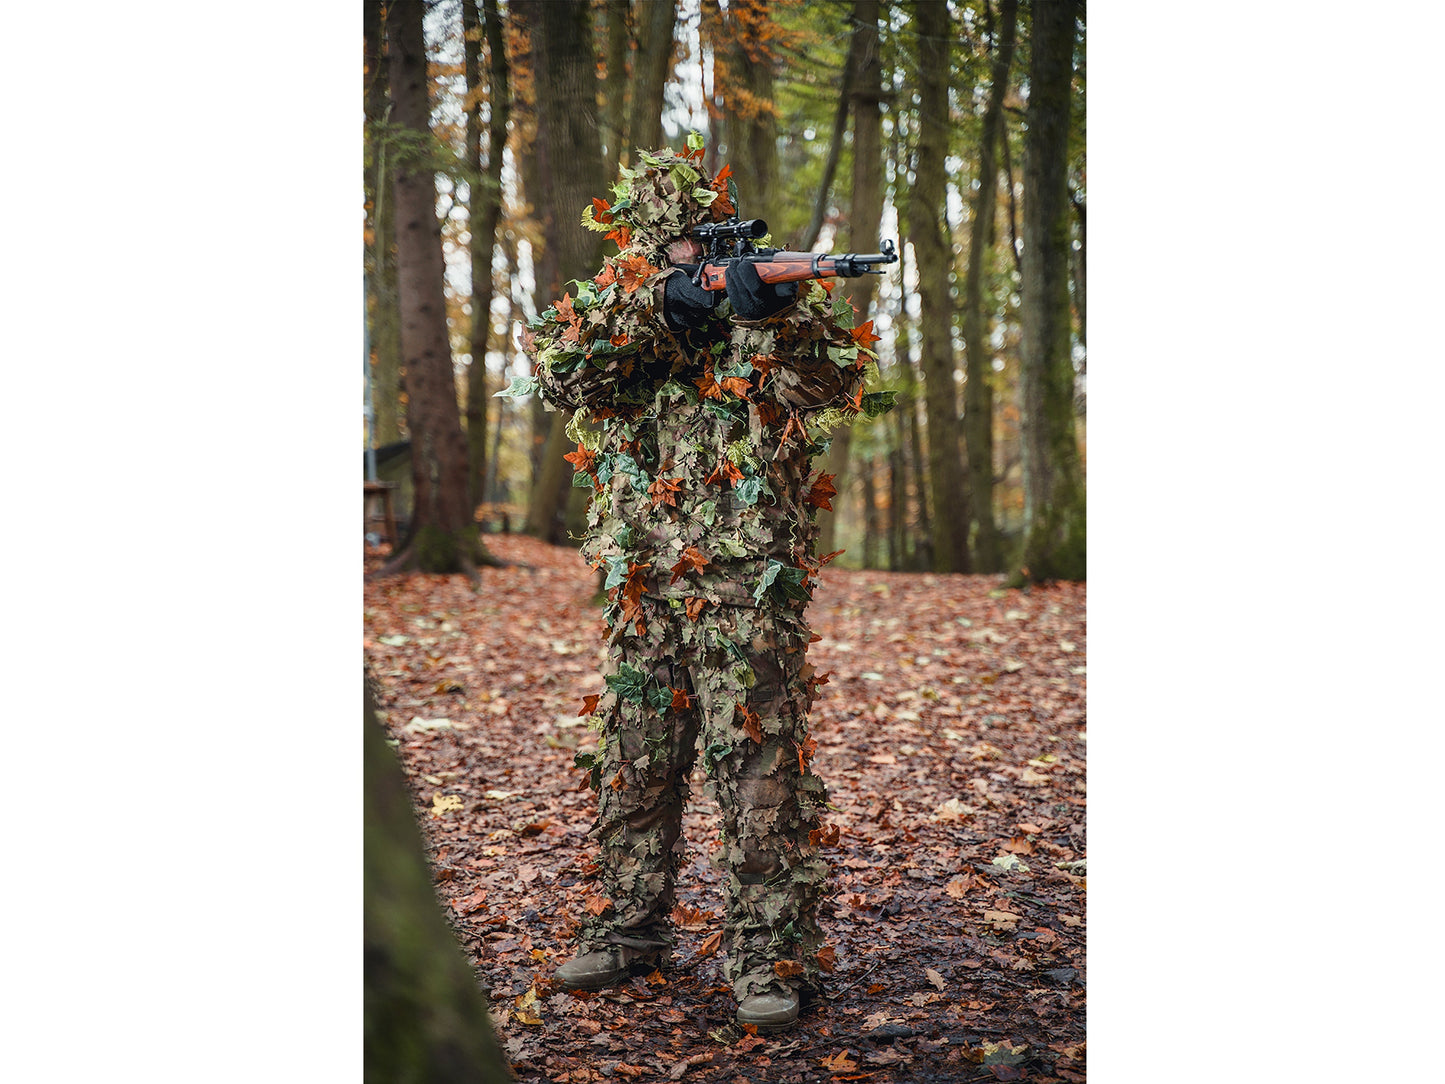 Airsoft Player in Ghillie Suit Aims Kar98k Sniper Rifle